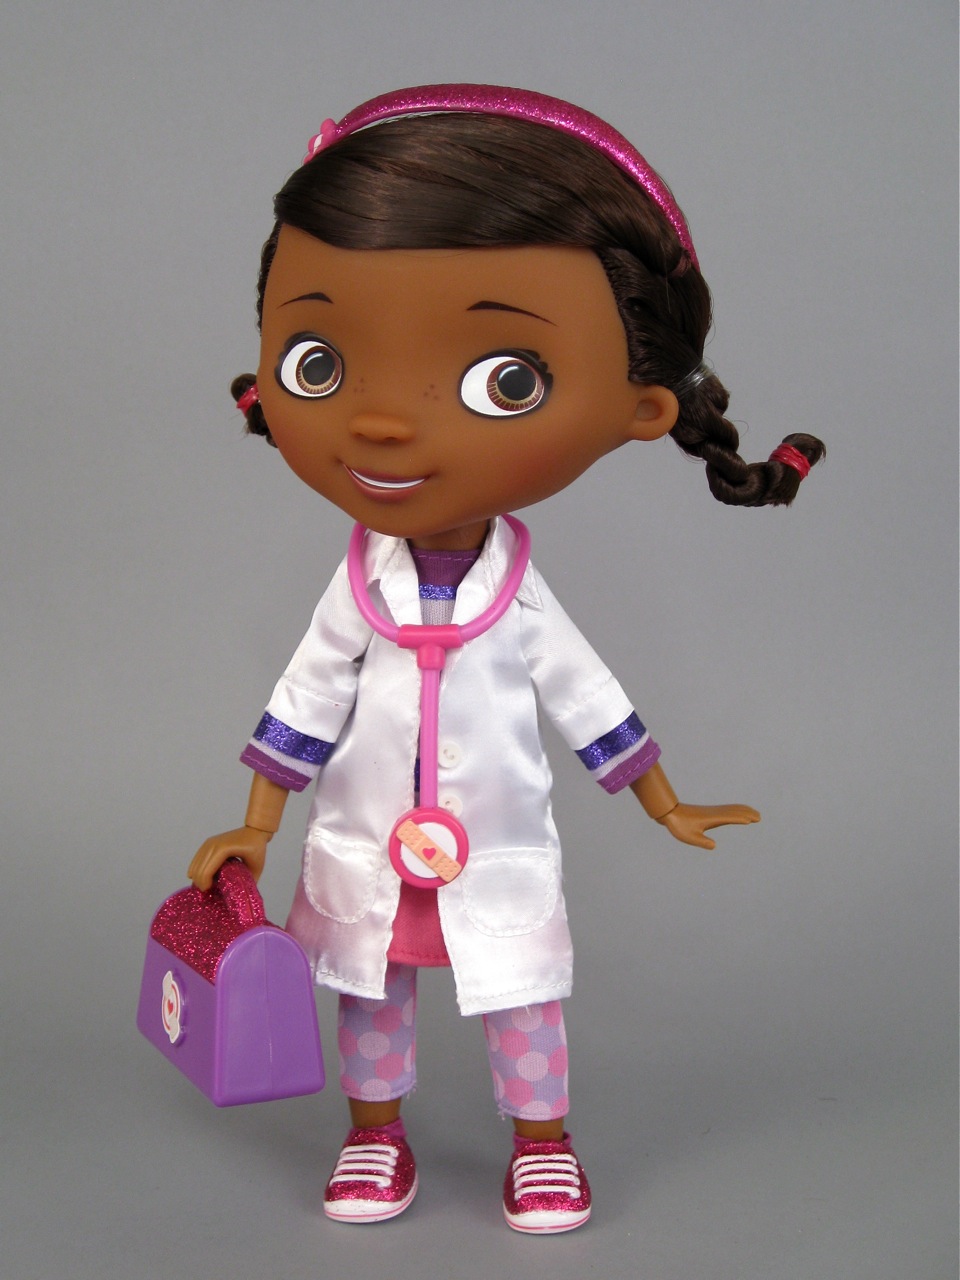 Doc McStuffins doll from Disney Store